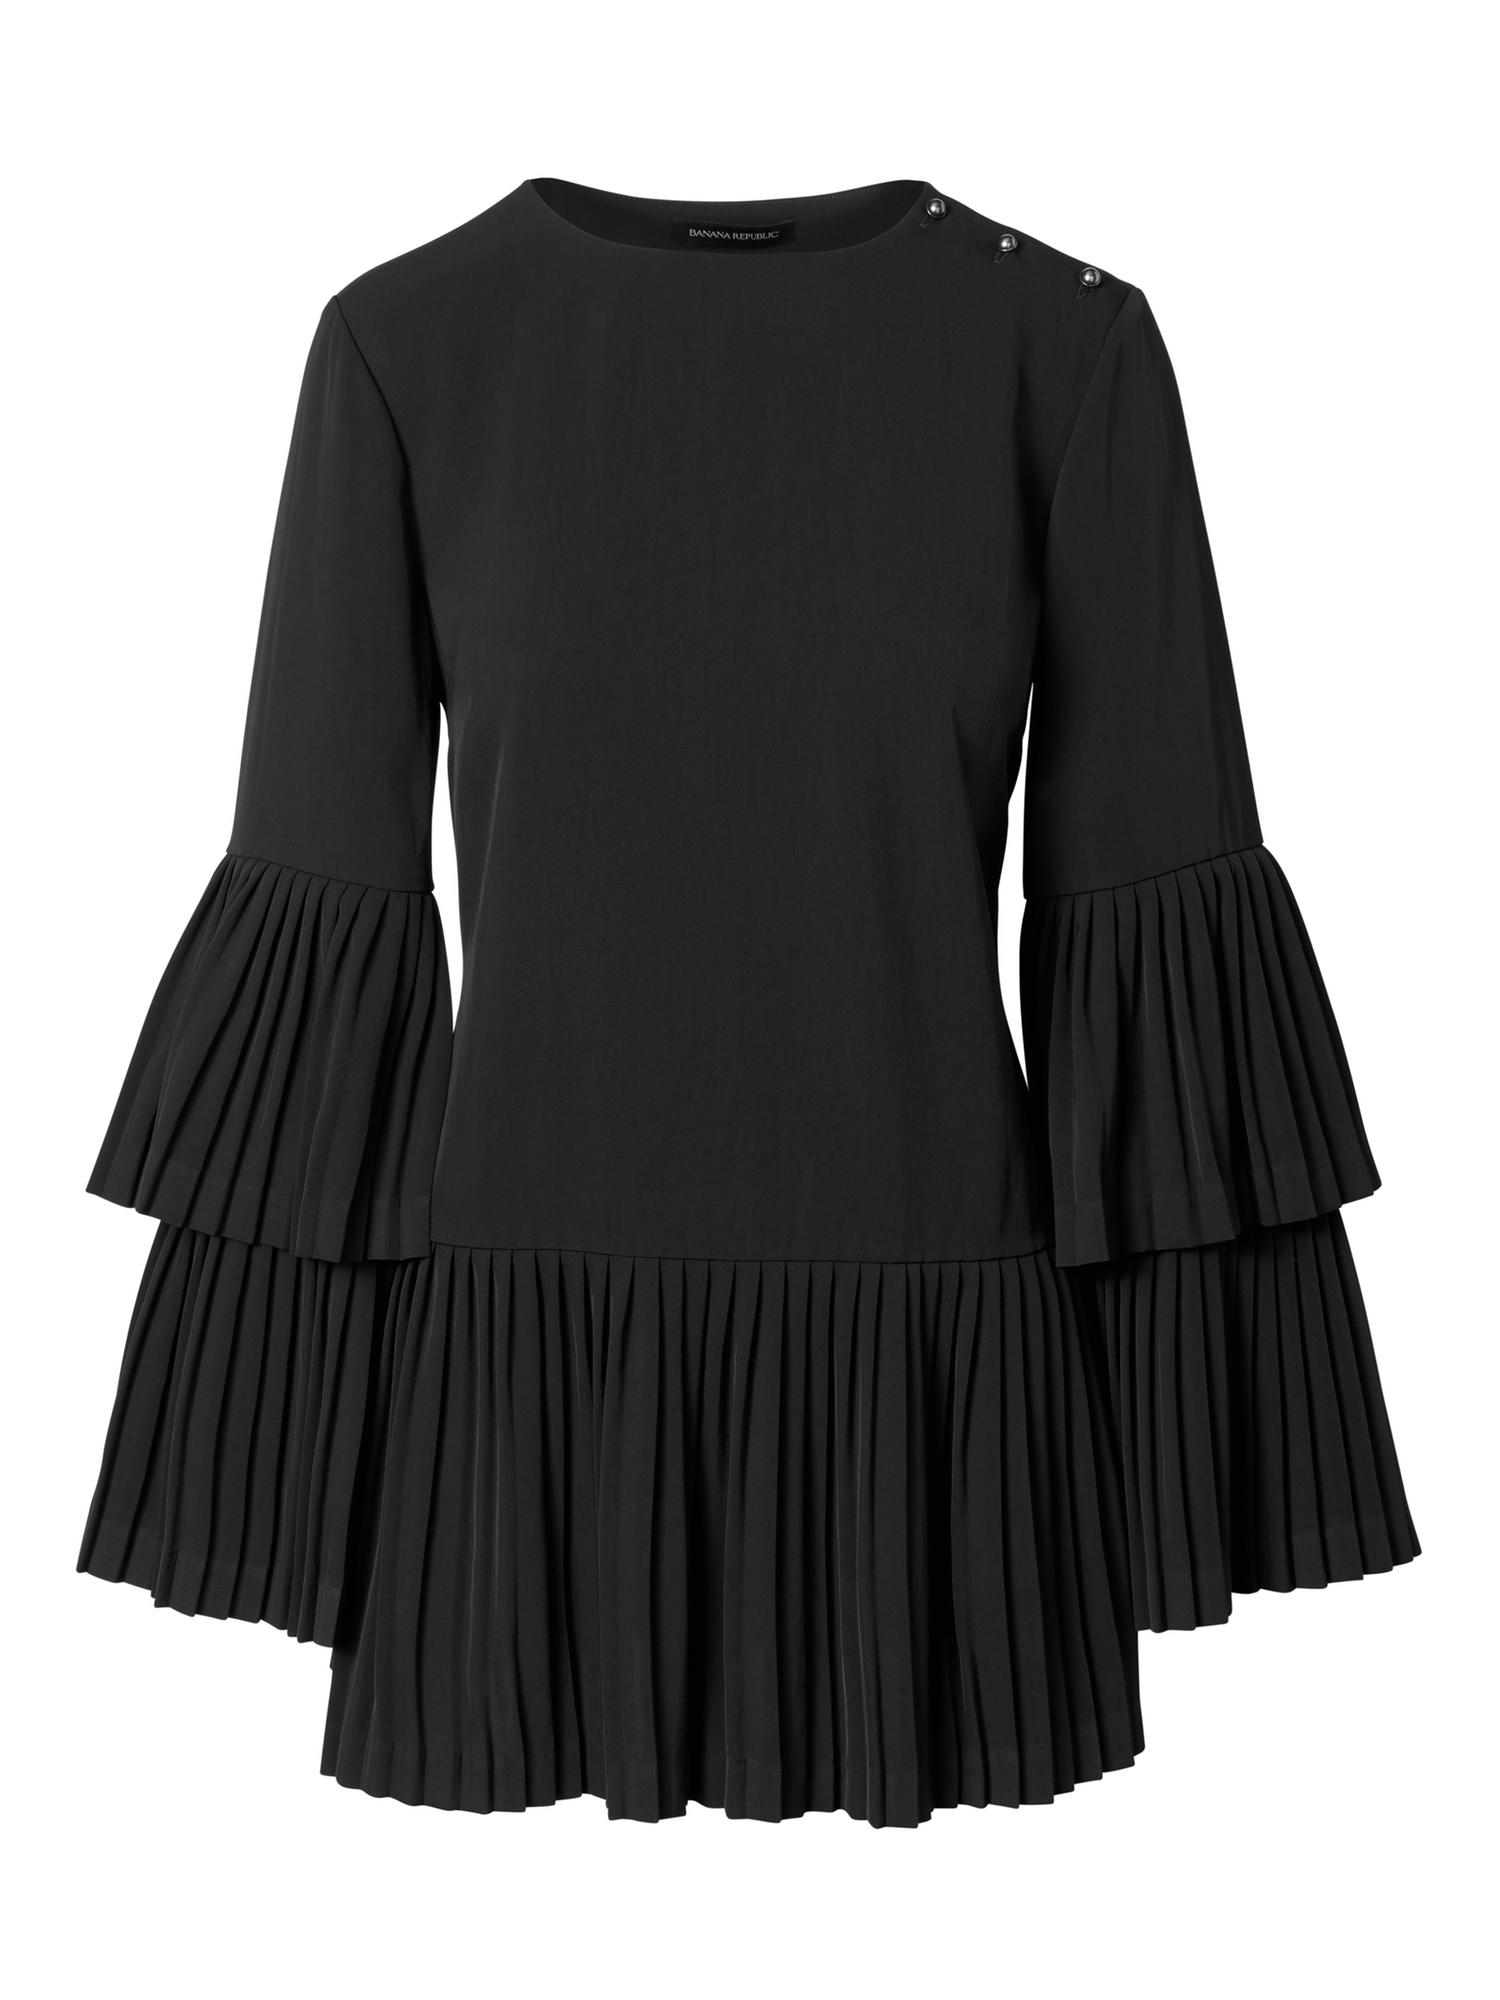 Banana Republic x Olivia Palermo &#124; Tiered Bell-Sleeve Top